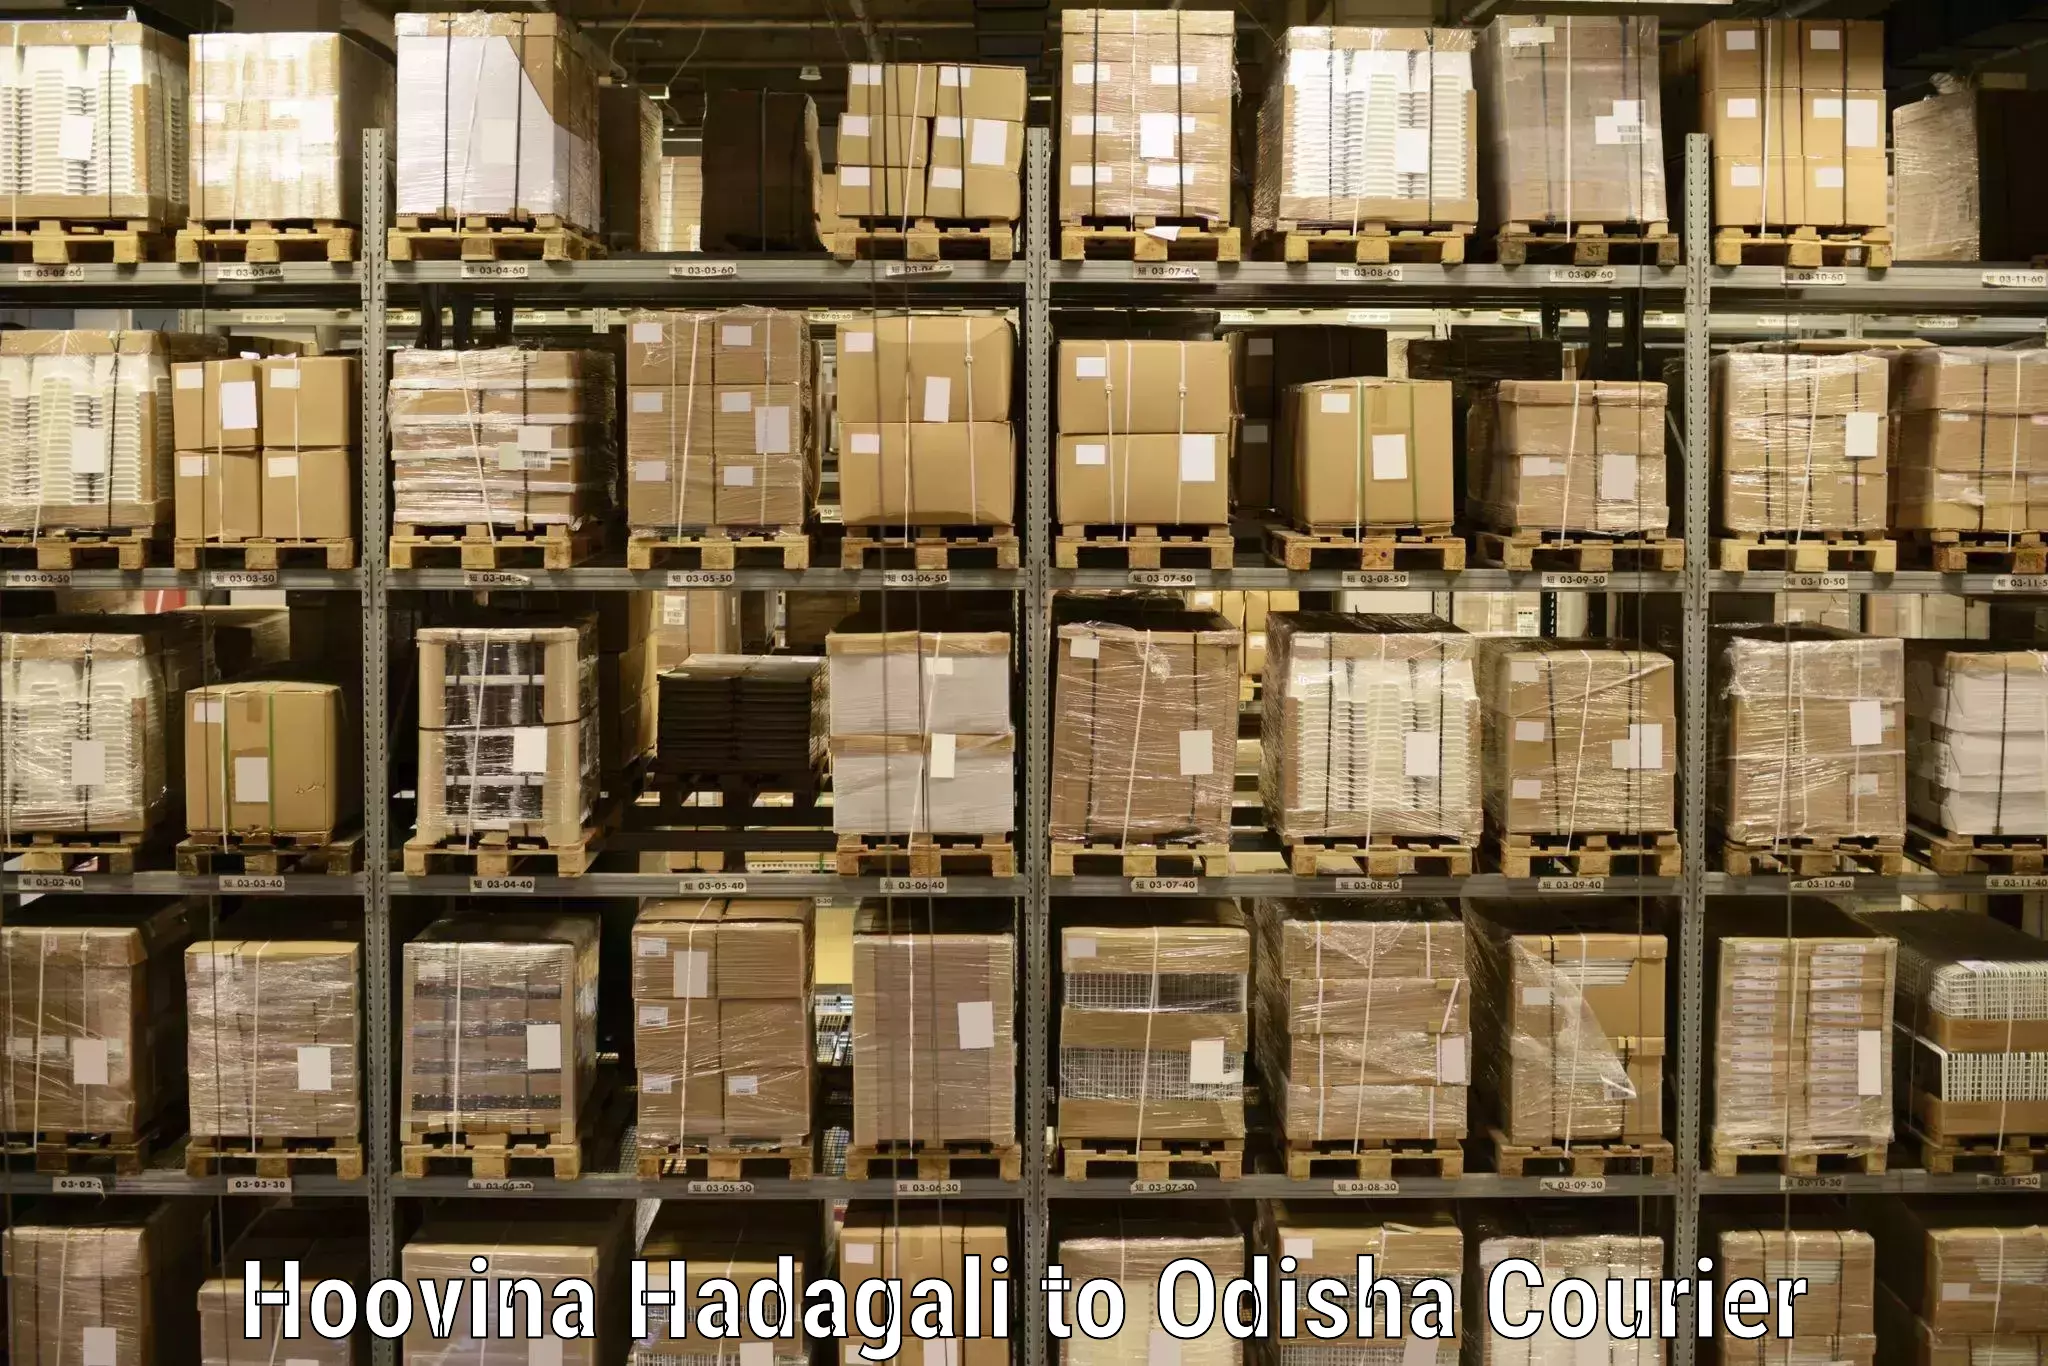 Easy access courier services Hoovina Hadagali to Cuttack